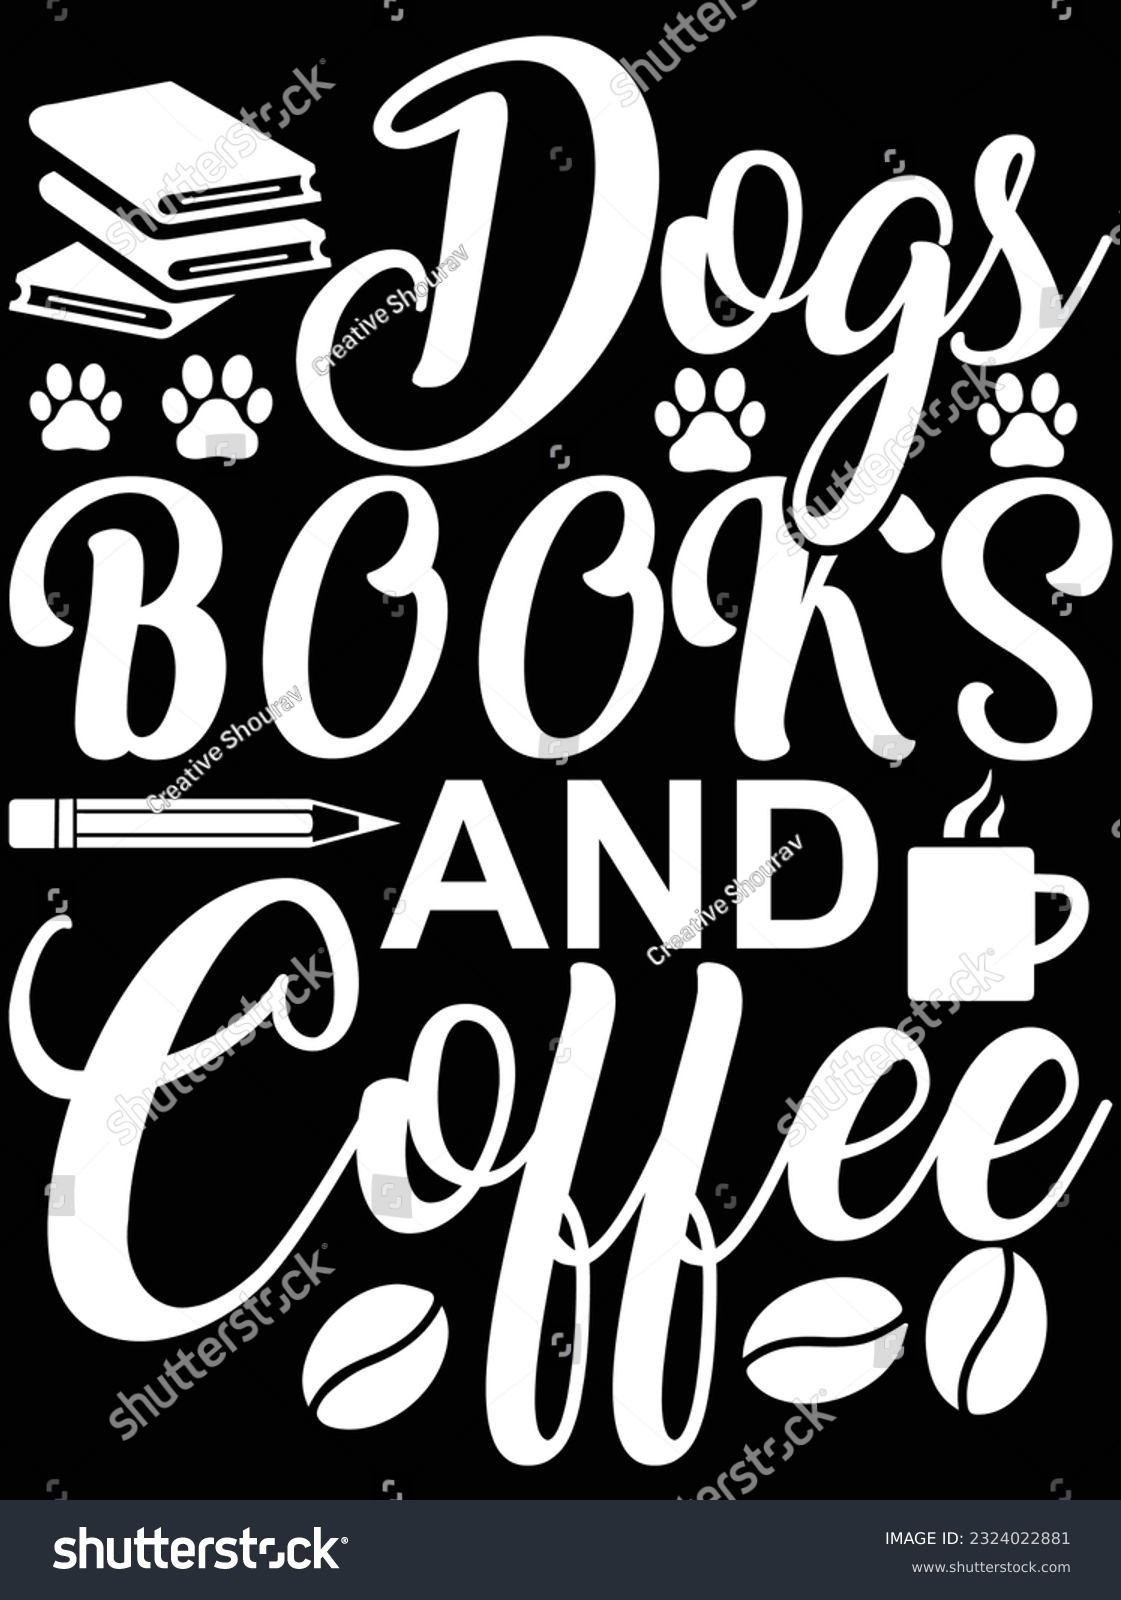 SVG of Dogs books and coffee vector art design, eps file. design file for t-shirt. SVG, EPS cuttable design file svg